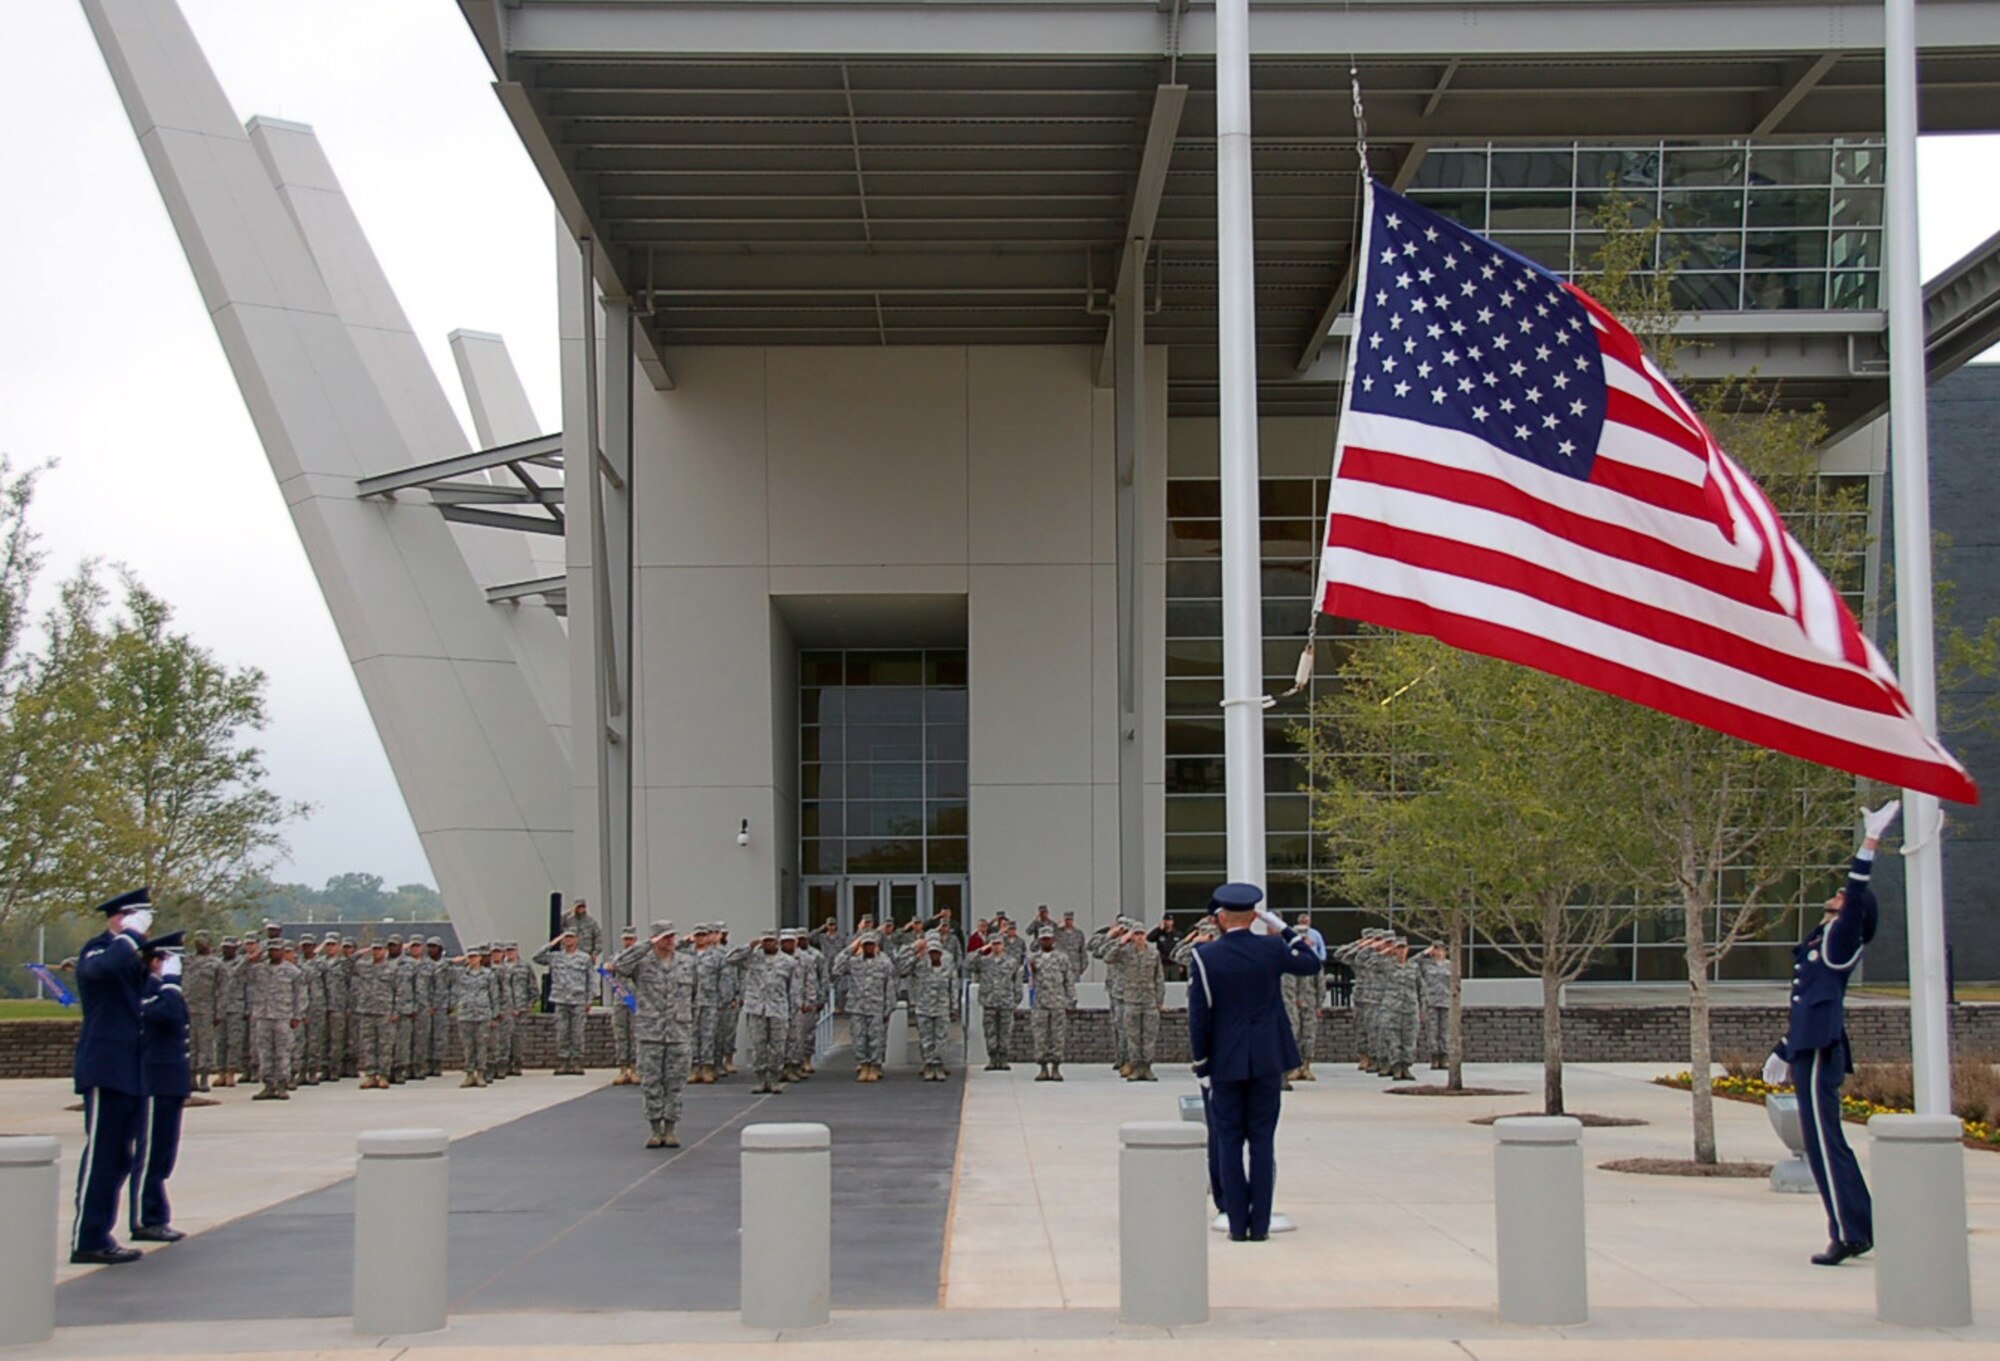 BOSSIER CITY, La. - Members of the 2nd Bomb Wing Honor Guard from Barksdale Air Force Base, La., lower the U.S. flag during a Headquarters Eighth Air Force retreat ceremony at the Cyber Innovation Center in Bossier City, La., Nov. 3, 2010, to commemorate the day in Eighth Air Force history. On Nov. 3, 1943, Eighth Air Force dispatched more than 500 B-17 Flying Fortresses and B-24 Liberators to Wilhelmshaven, a German port along the North Sea, with the primary mission of striking U-boat construction yards in the area. This was the first “500 bomber strike” conducted by Eighth Air Force and the mission showcased the growing air power of the “Mighty Eighth” and highlighted its innovation spirit in employing new technology in combat. (U.S. Air Force photo by Staff Sgt. Brian Stives)